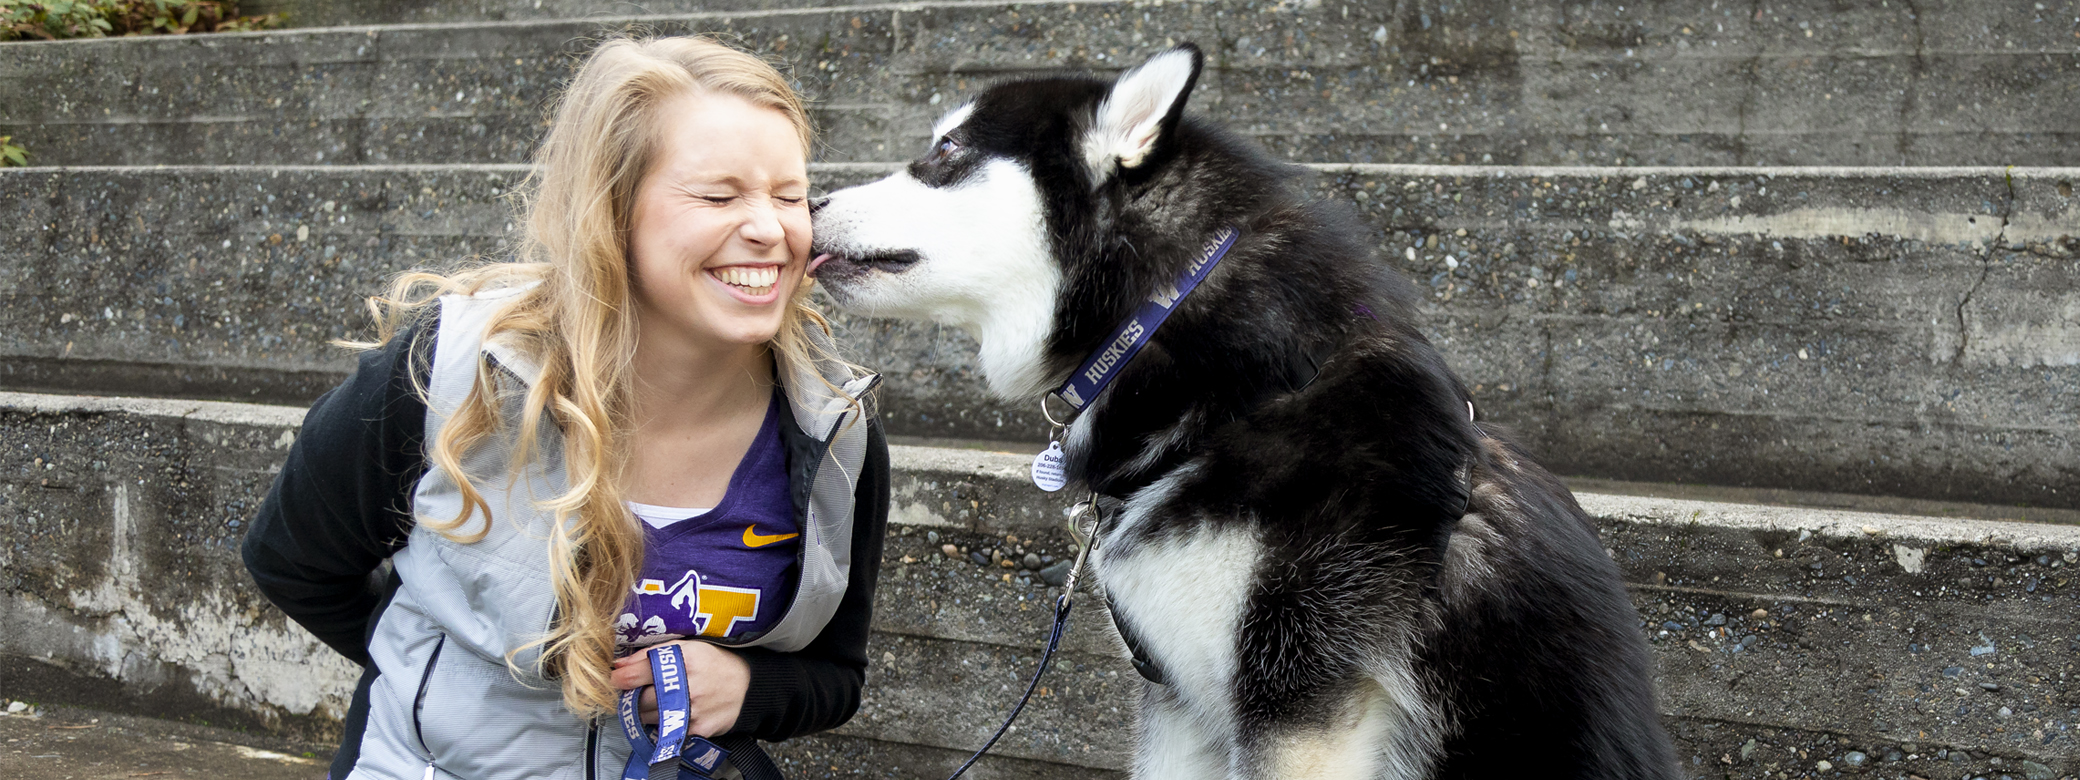 Husky licks a smiling person's face.